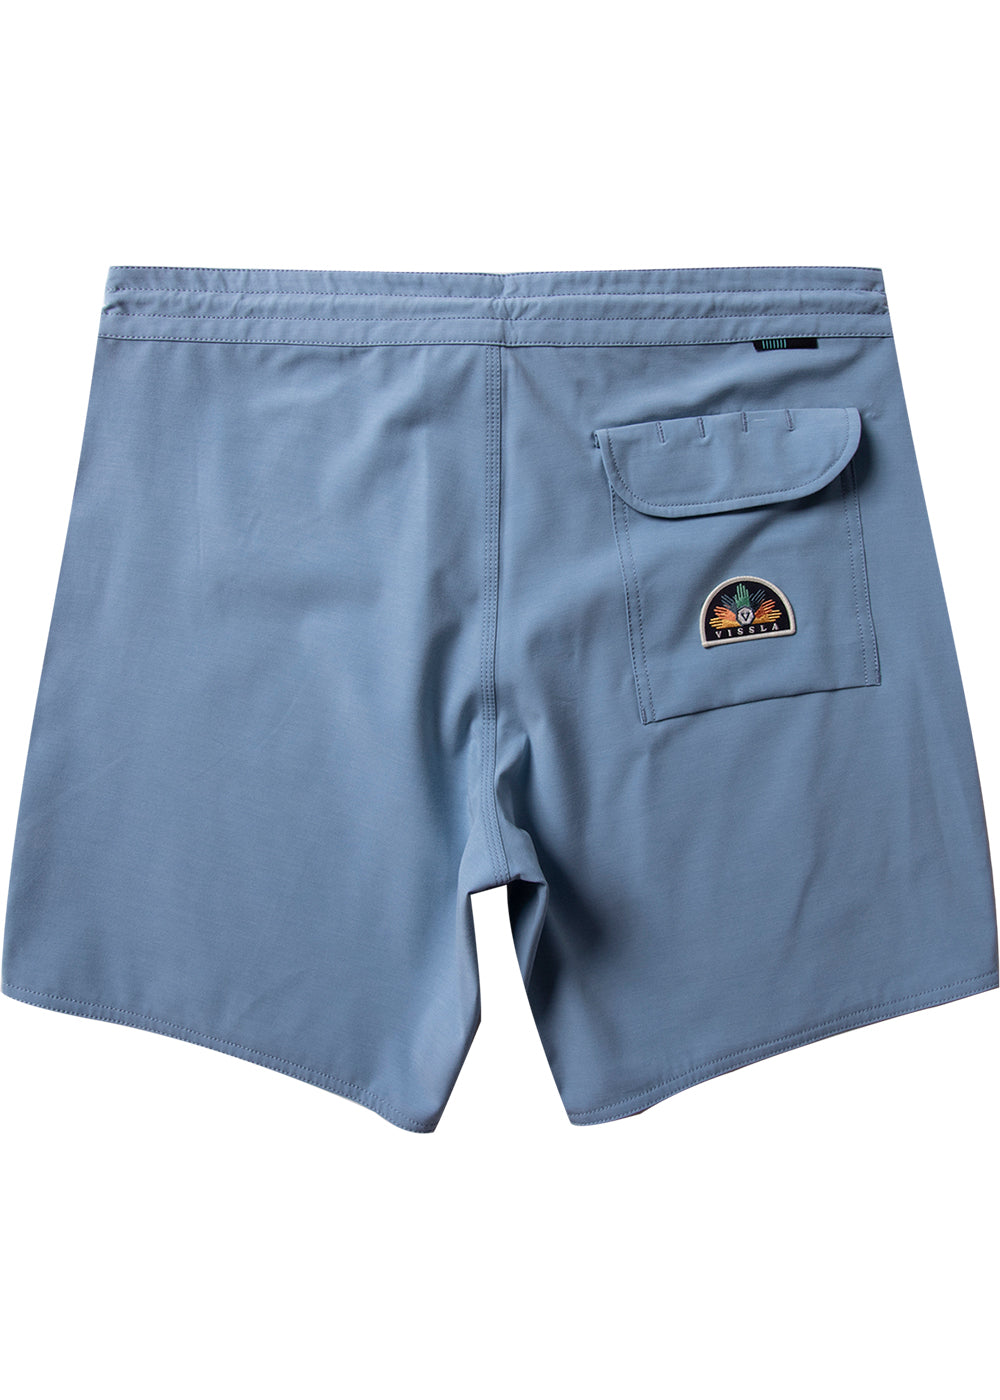 Vissla Men's cool blue Short Sets 16.5" Board short with white rope. Velcro pocket with patch. Back view